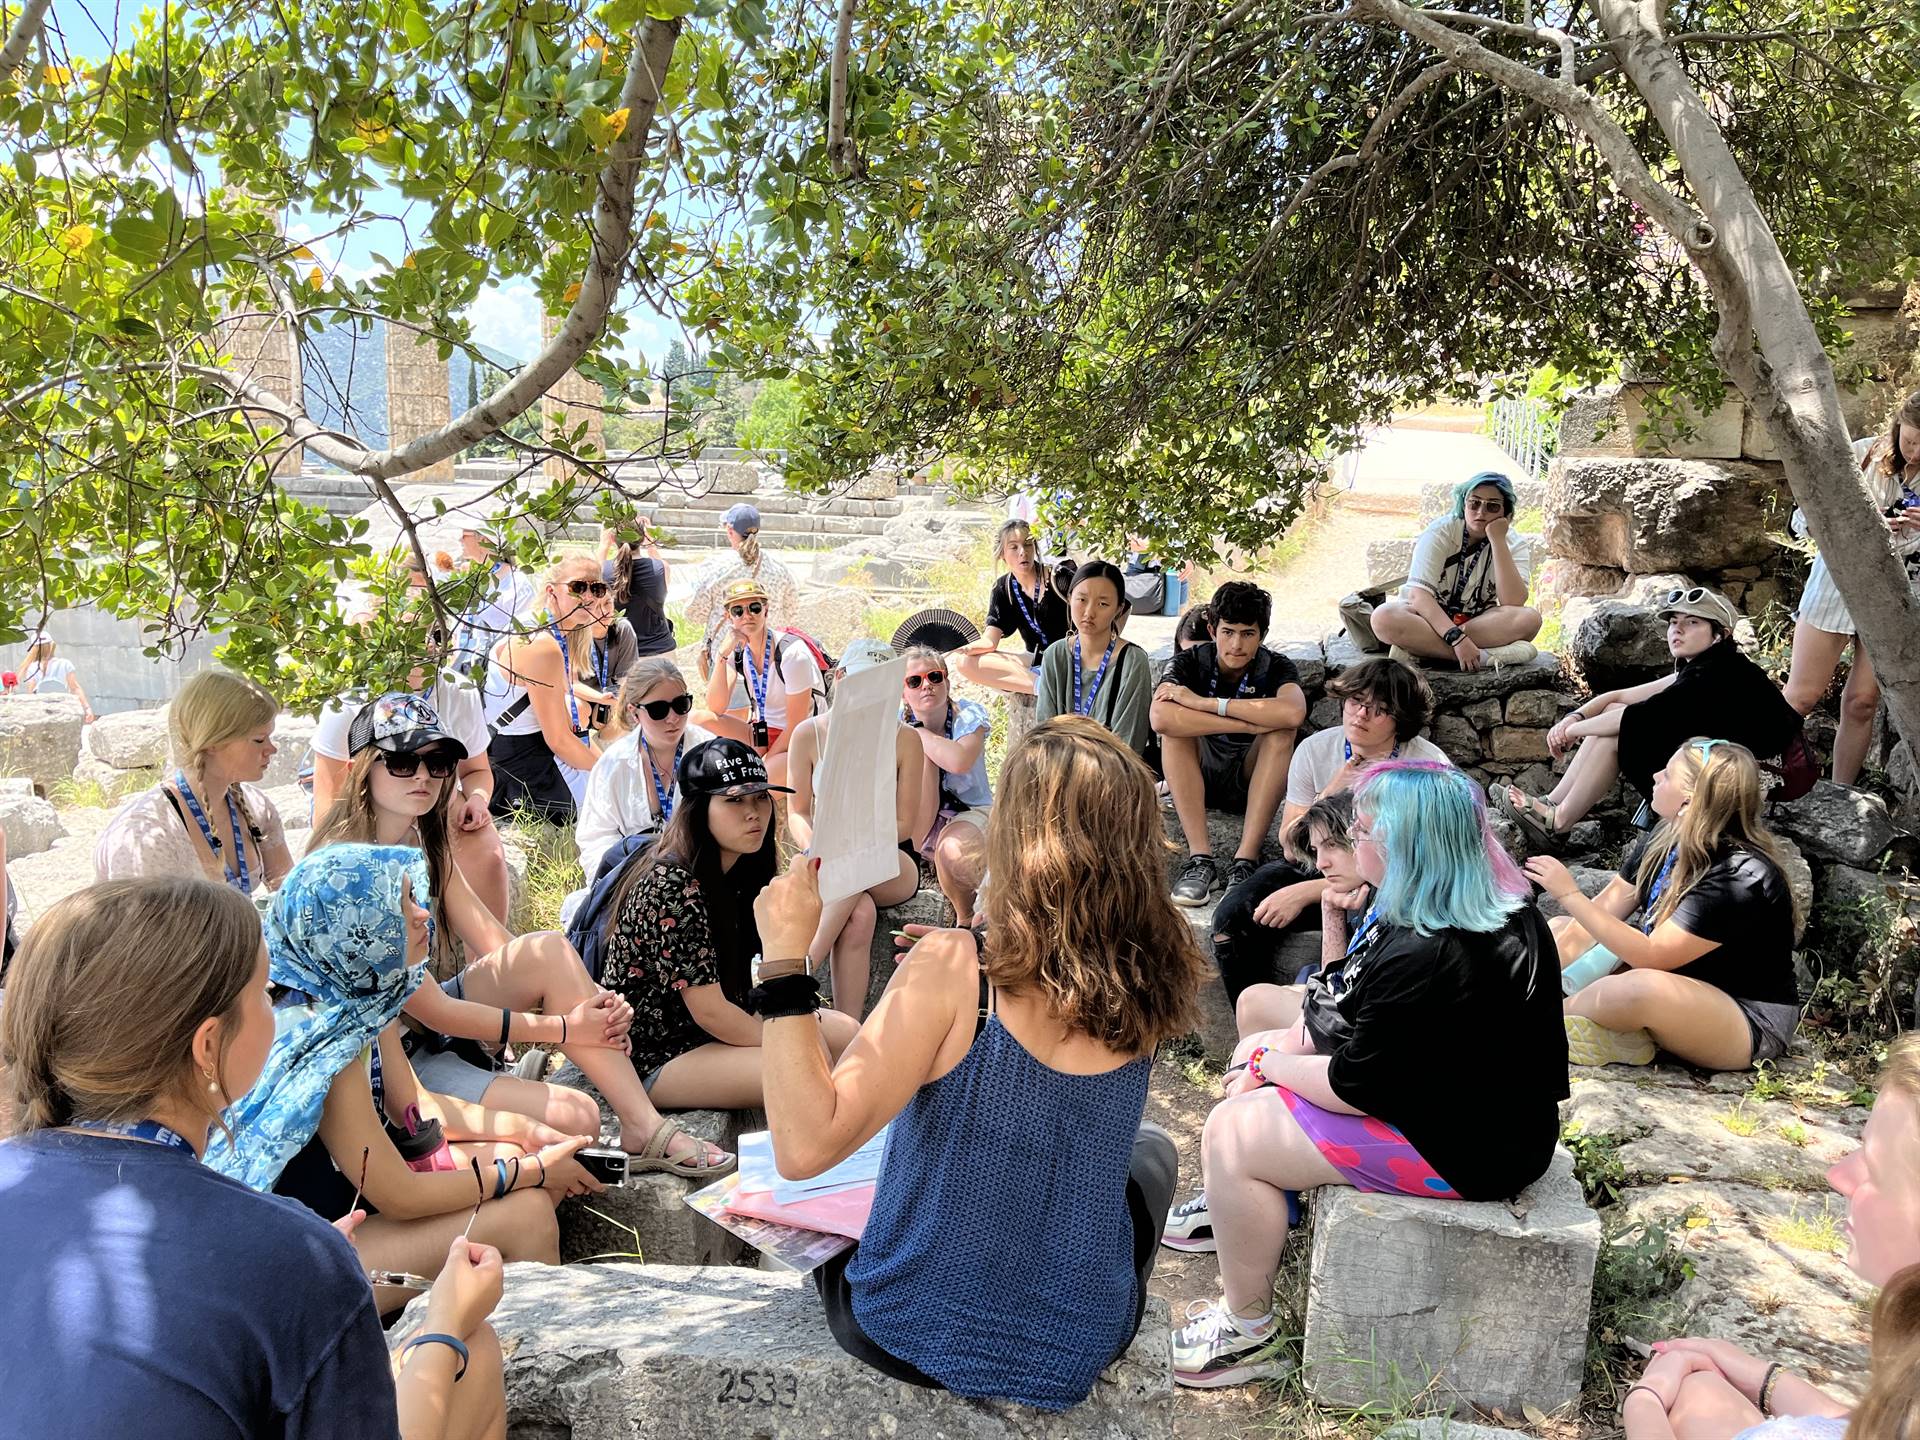 A group of students gathered on rocks, listening to a speaker